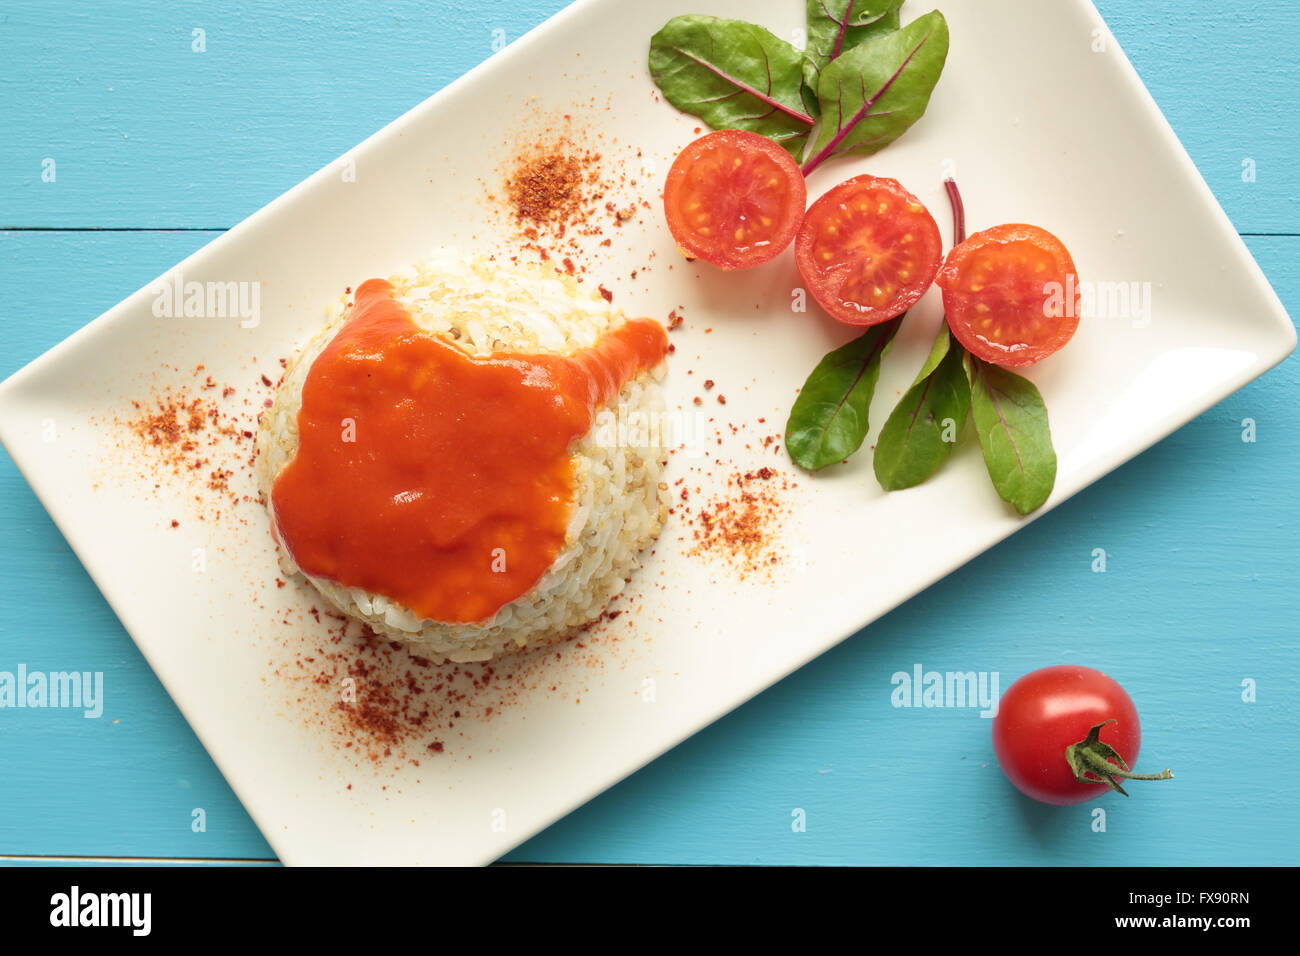 Cuban style rice decorated with cherrys tomatoes and a green leaves. Stock Photo